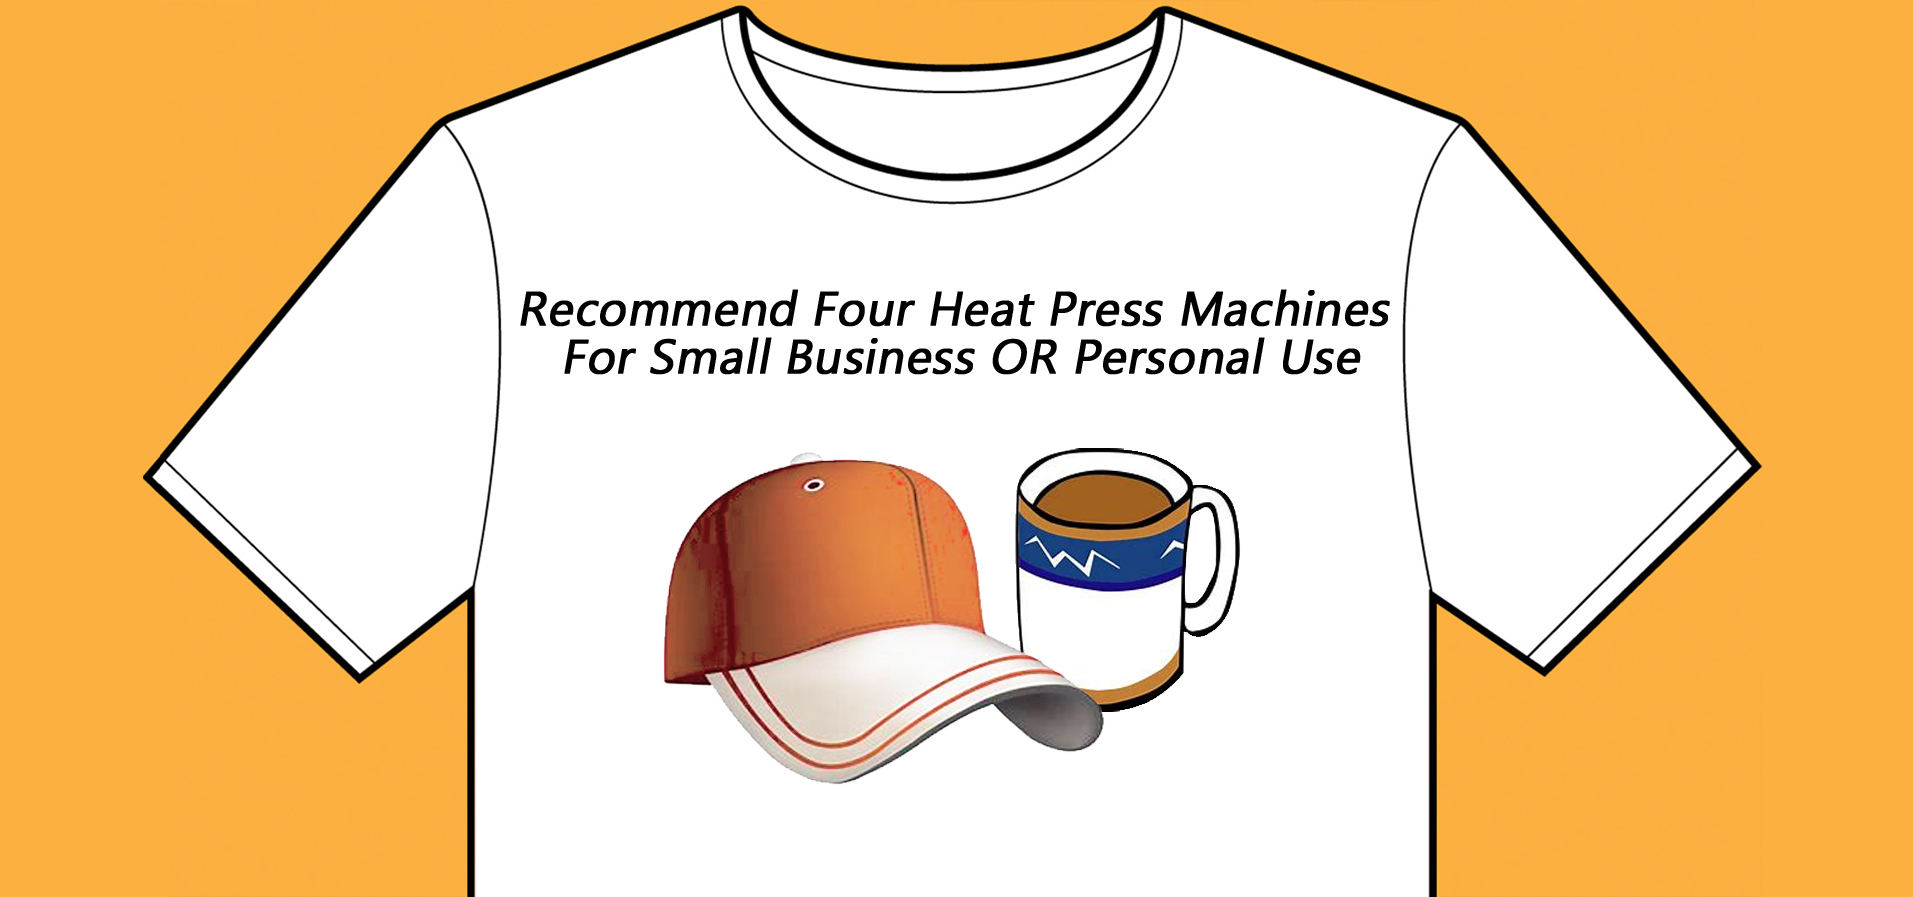 Recommend Four Heat Press Machines For Small Business OR Personal Use